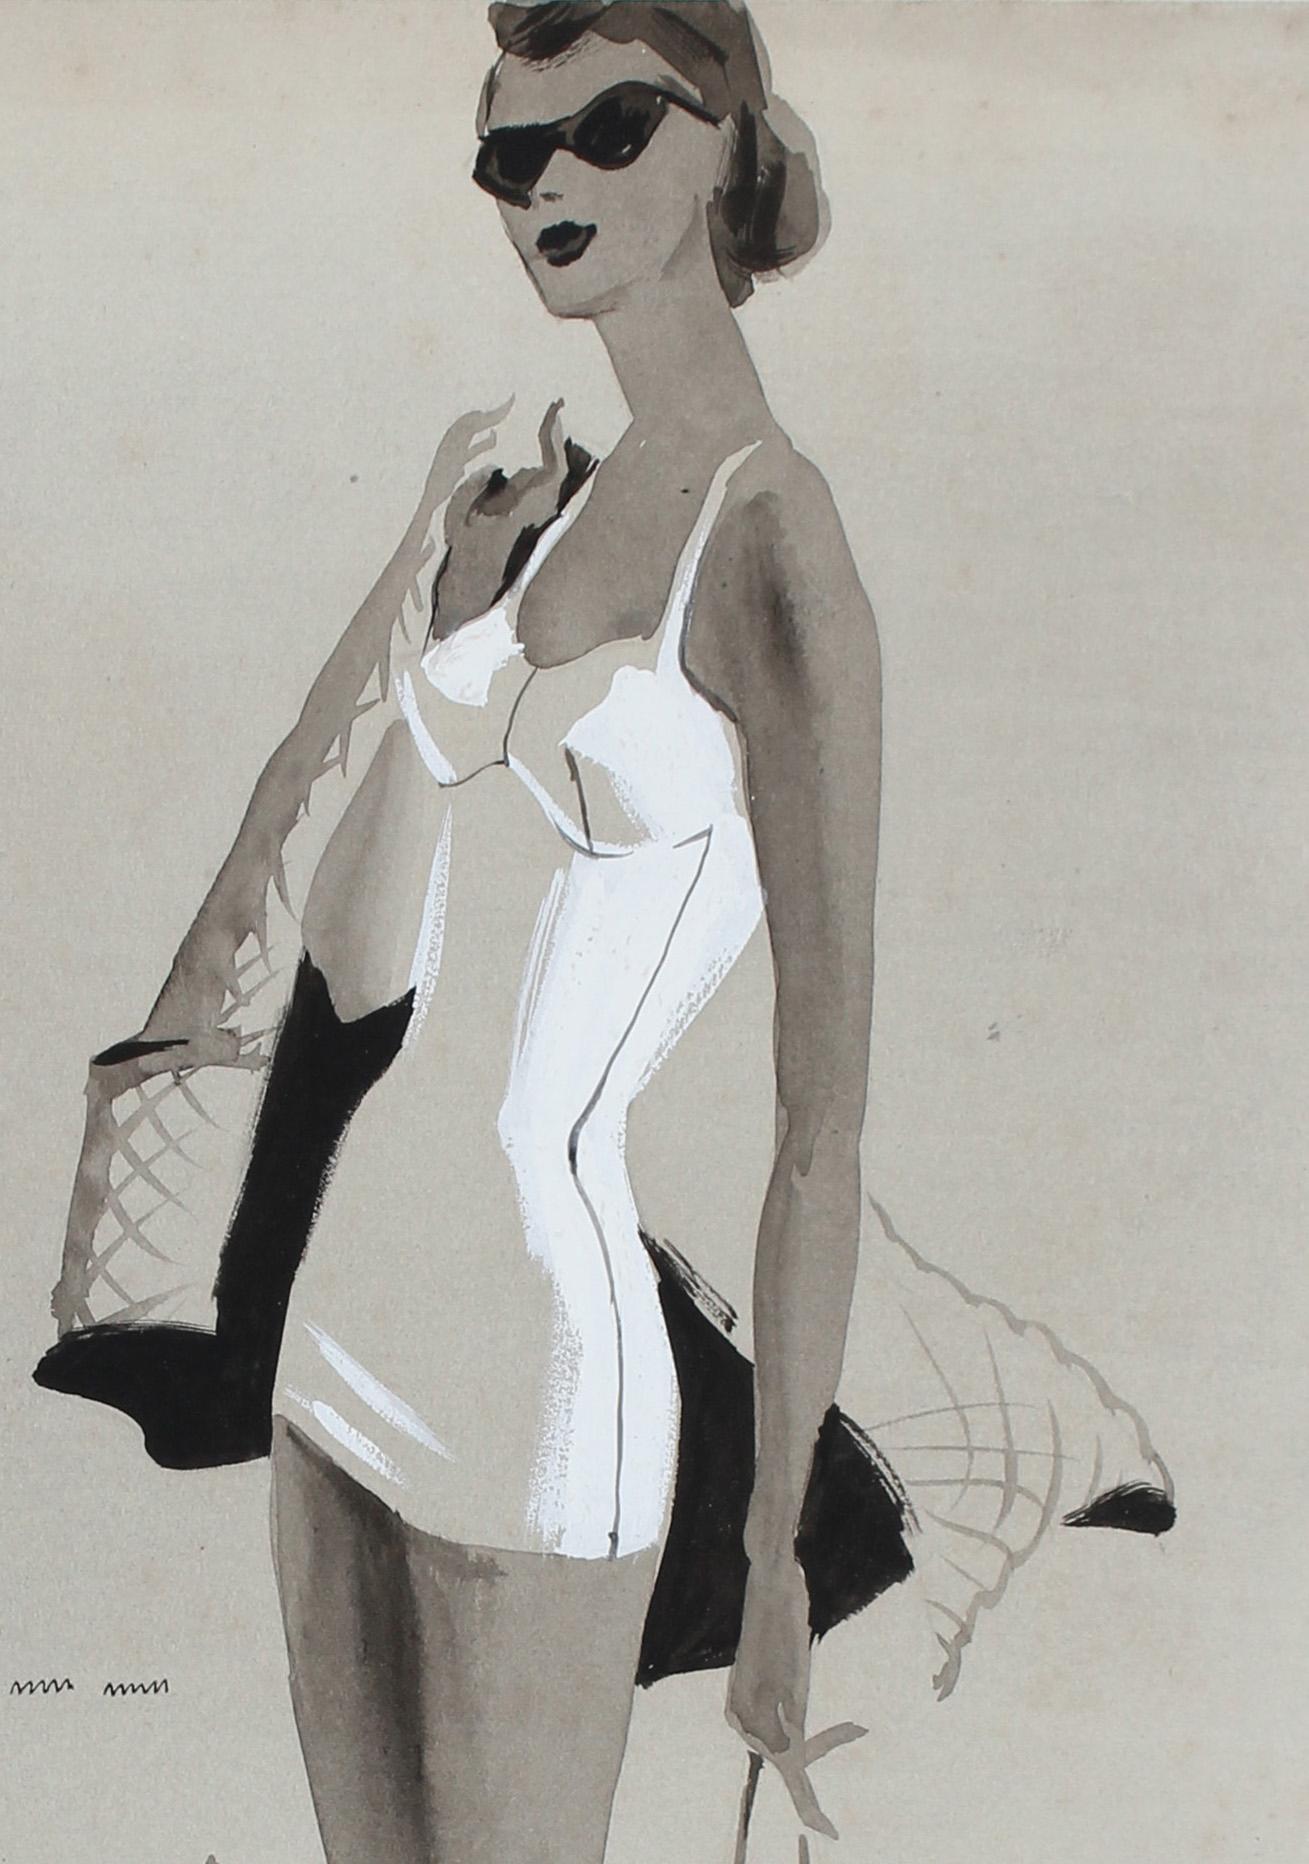 This 1950 to 1960's Cole of California gouache on paper portrait of a summer beach goer in a bathing suit and sunglasses in a seashell is by Bay Area painter, printmaker, and designer Calvin Anderson (b. 1925).  He studied at CCAC and Art Center